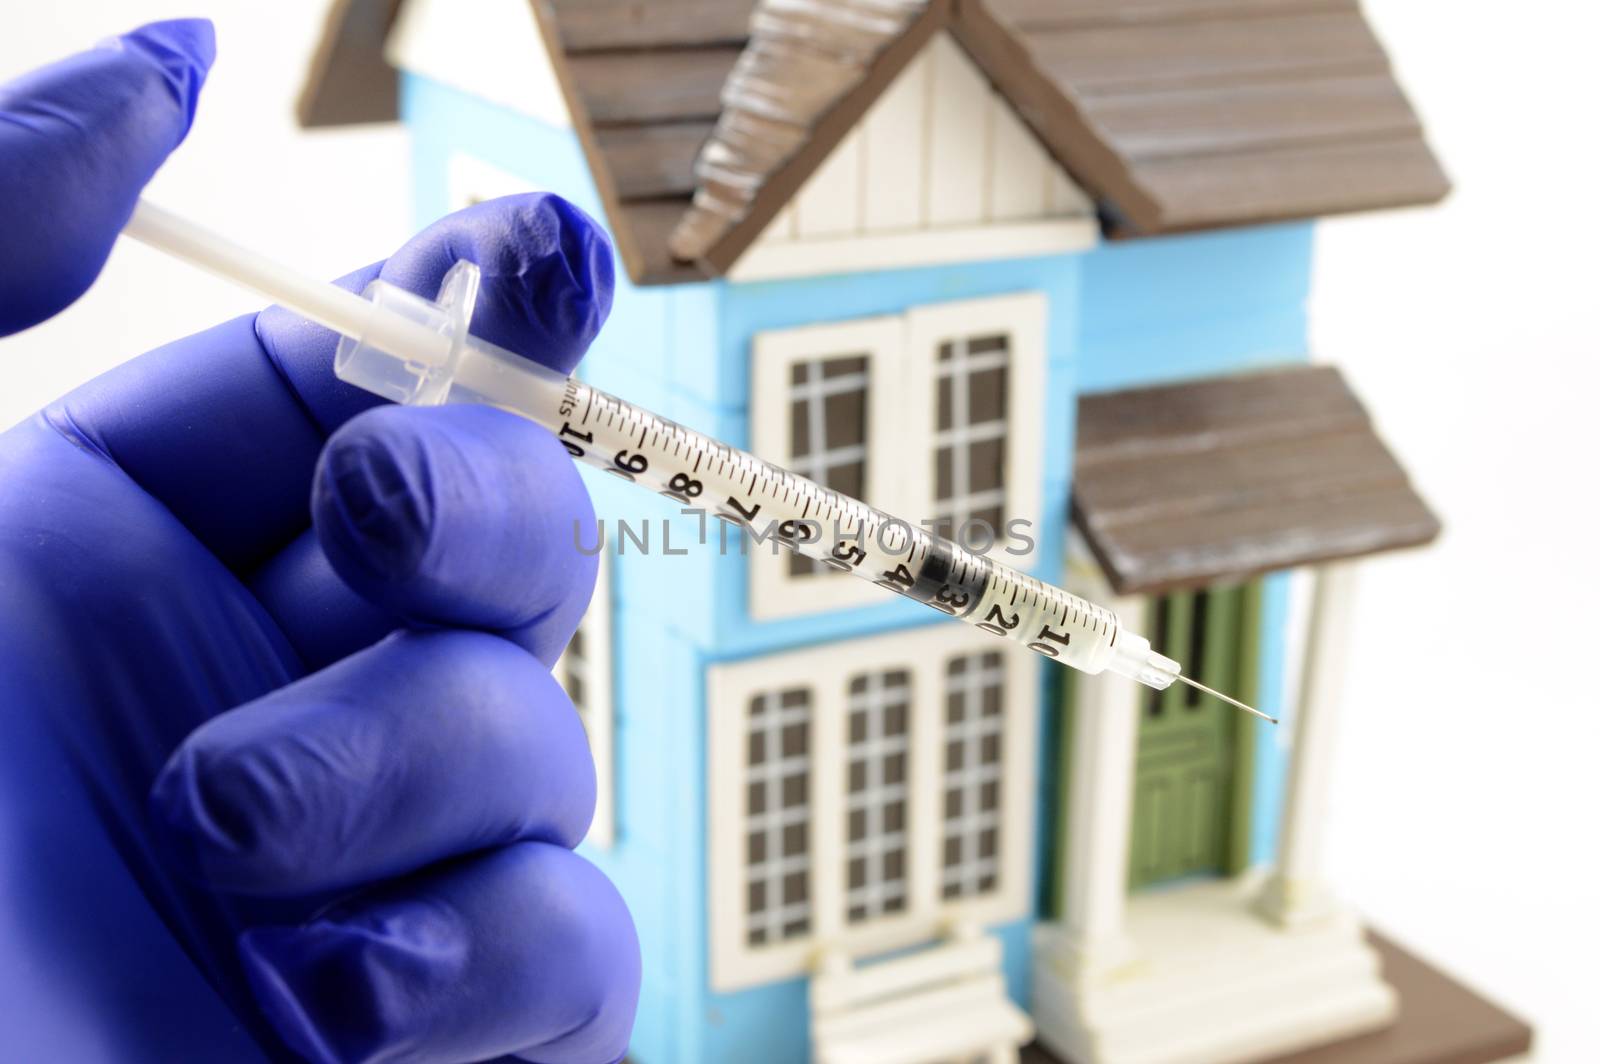 A concept of a medical professional preparing a vaccine for quarantine households affected by Covid-19 Coronavirus edpidemic.